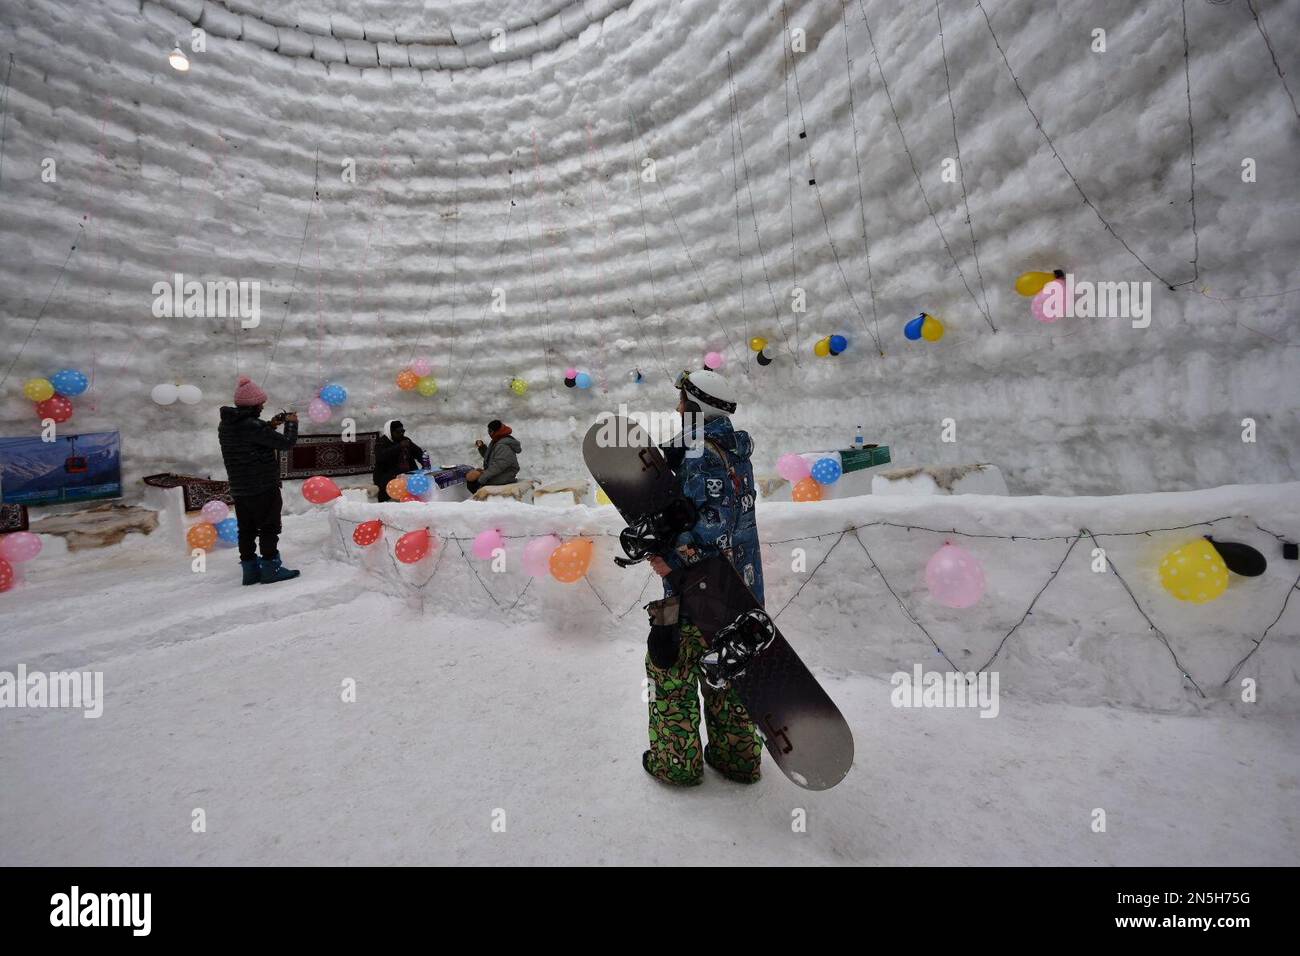 Tourists visit the Igloo cafe in Ski resort Gulmarg, Indian Administered  Kashmir on 08 February 2023.An igloo cafe, claimed to be the world's  largest, has come up at the famous ski-resort of